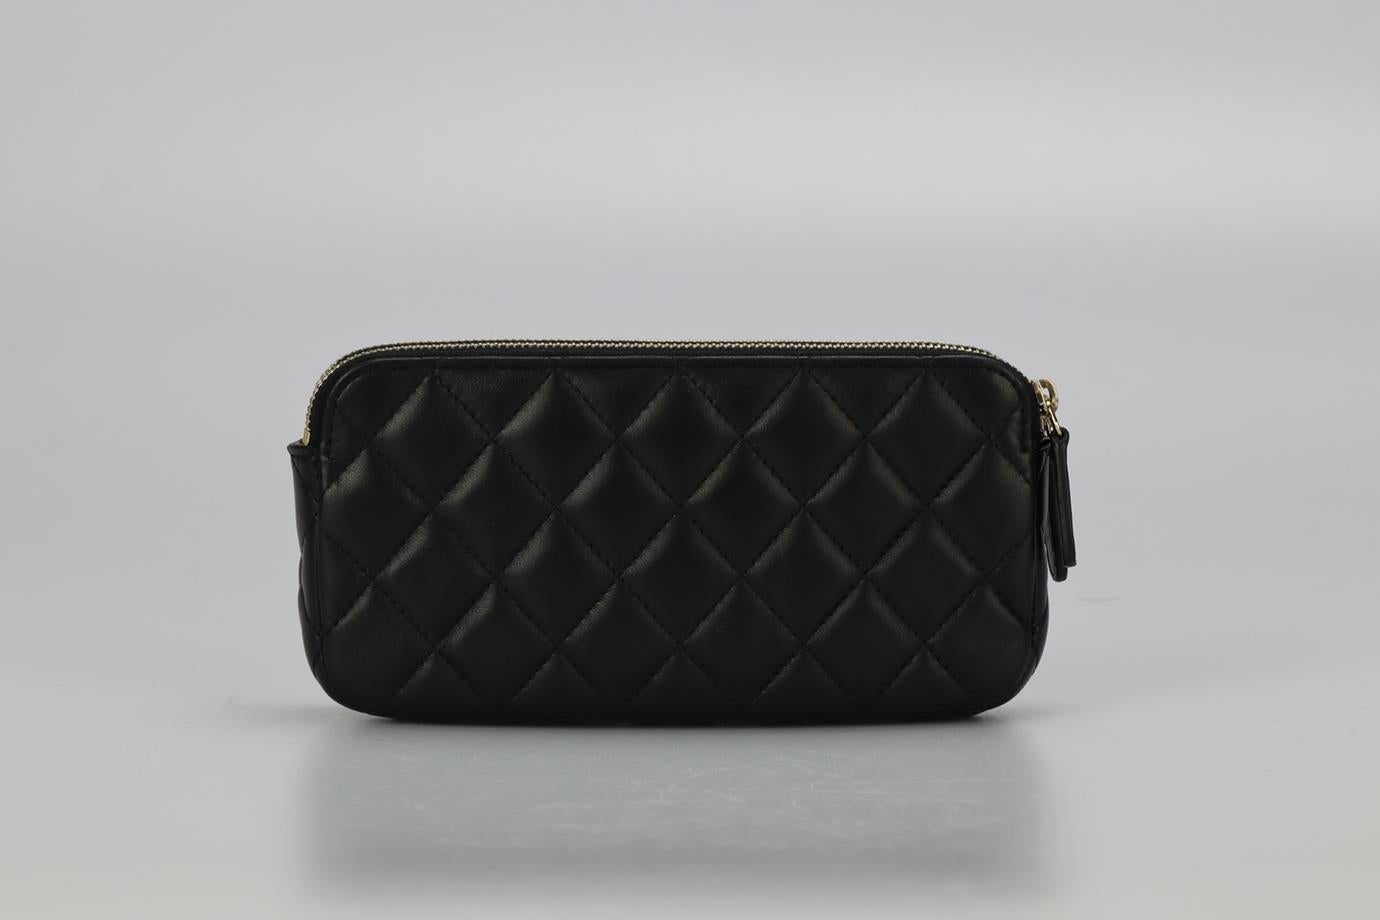 Black Chanel 2016 Clutch With Chain Quilted Leather Shoulder Bag For Sale